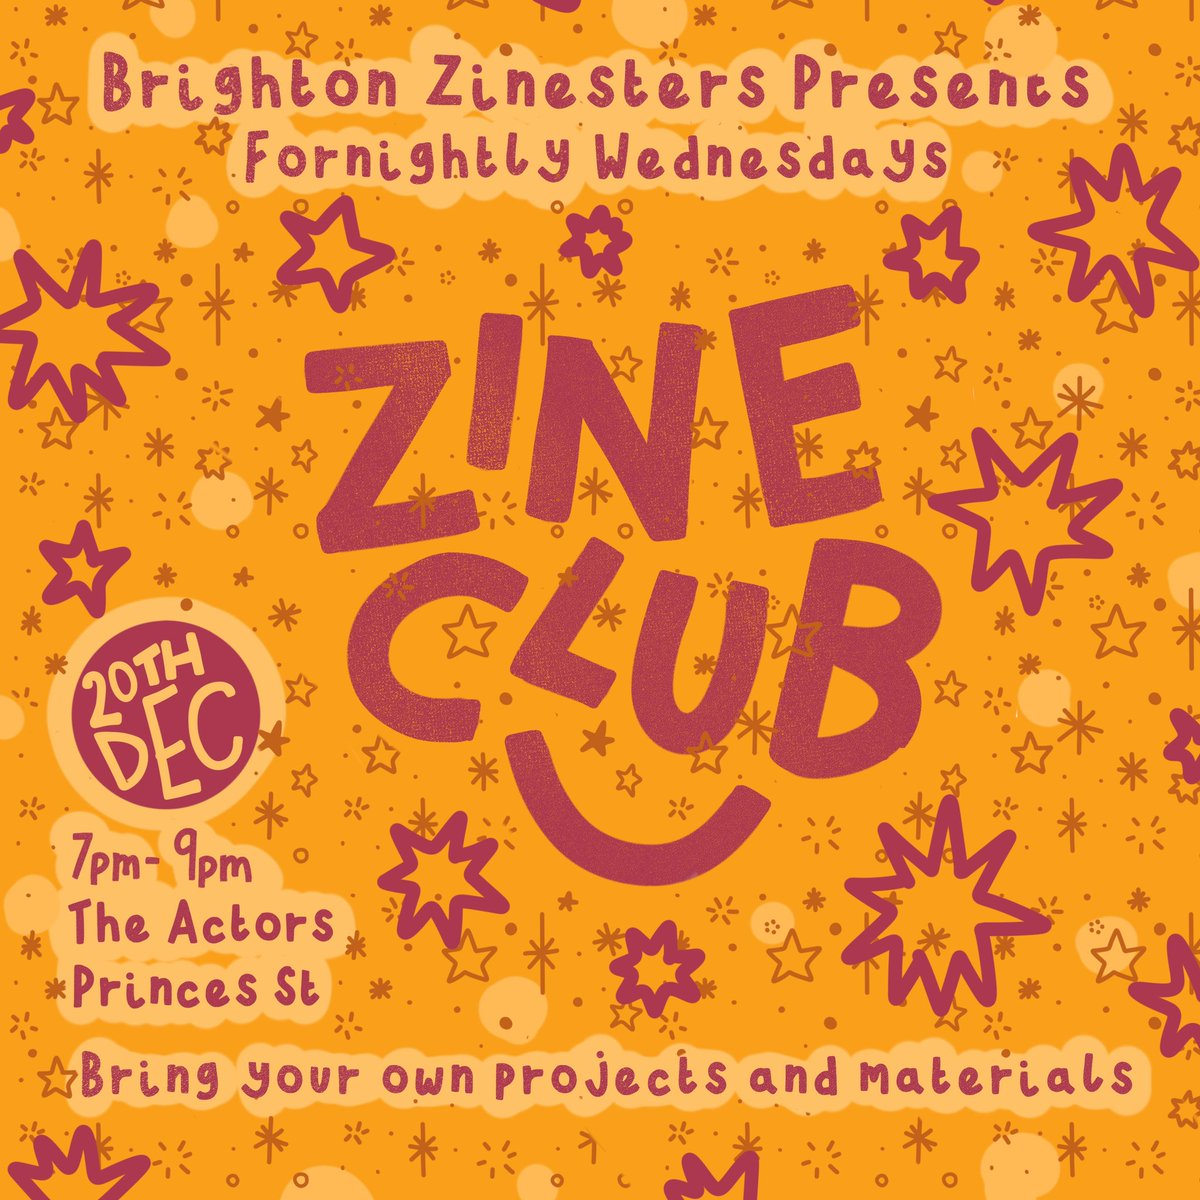 Last Zine Club of 2023! Come along this Wednesday @ The Actors. 7pm-9pm.